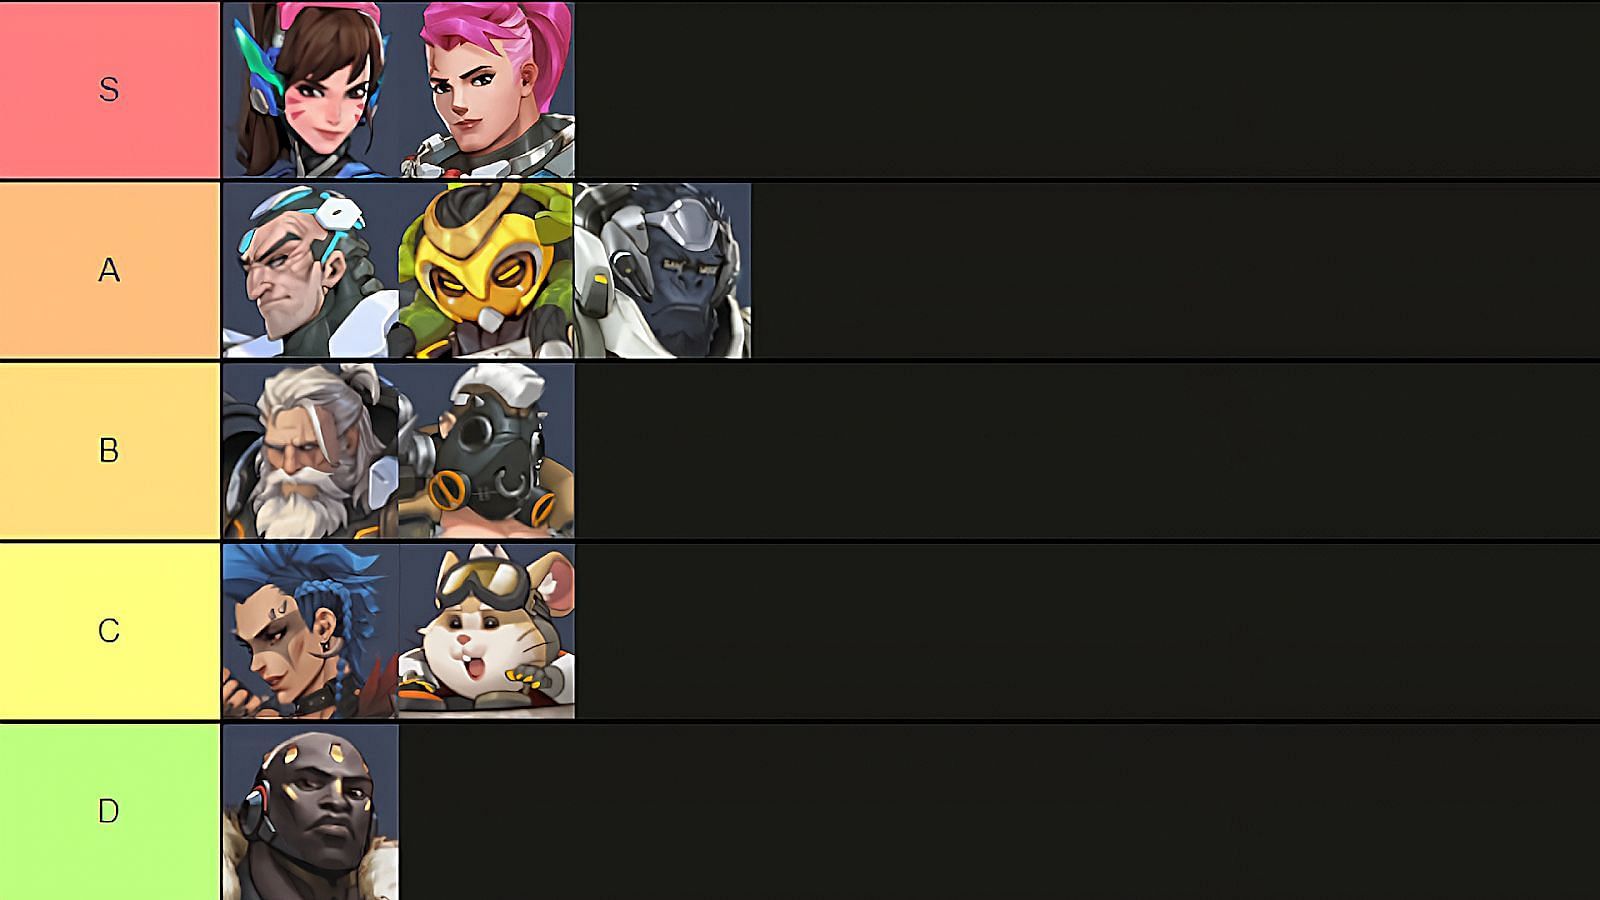 Overwatch 2 character tier list for the best Heroes to play as